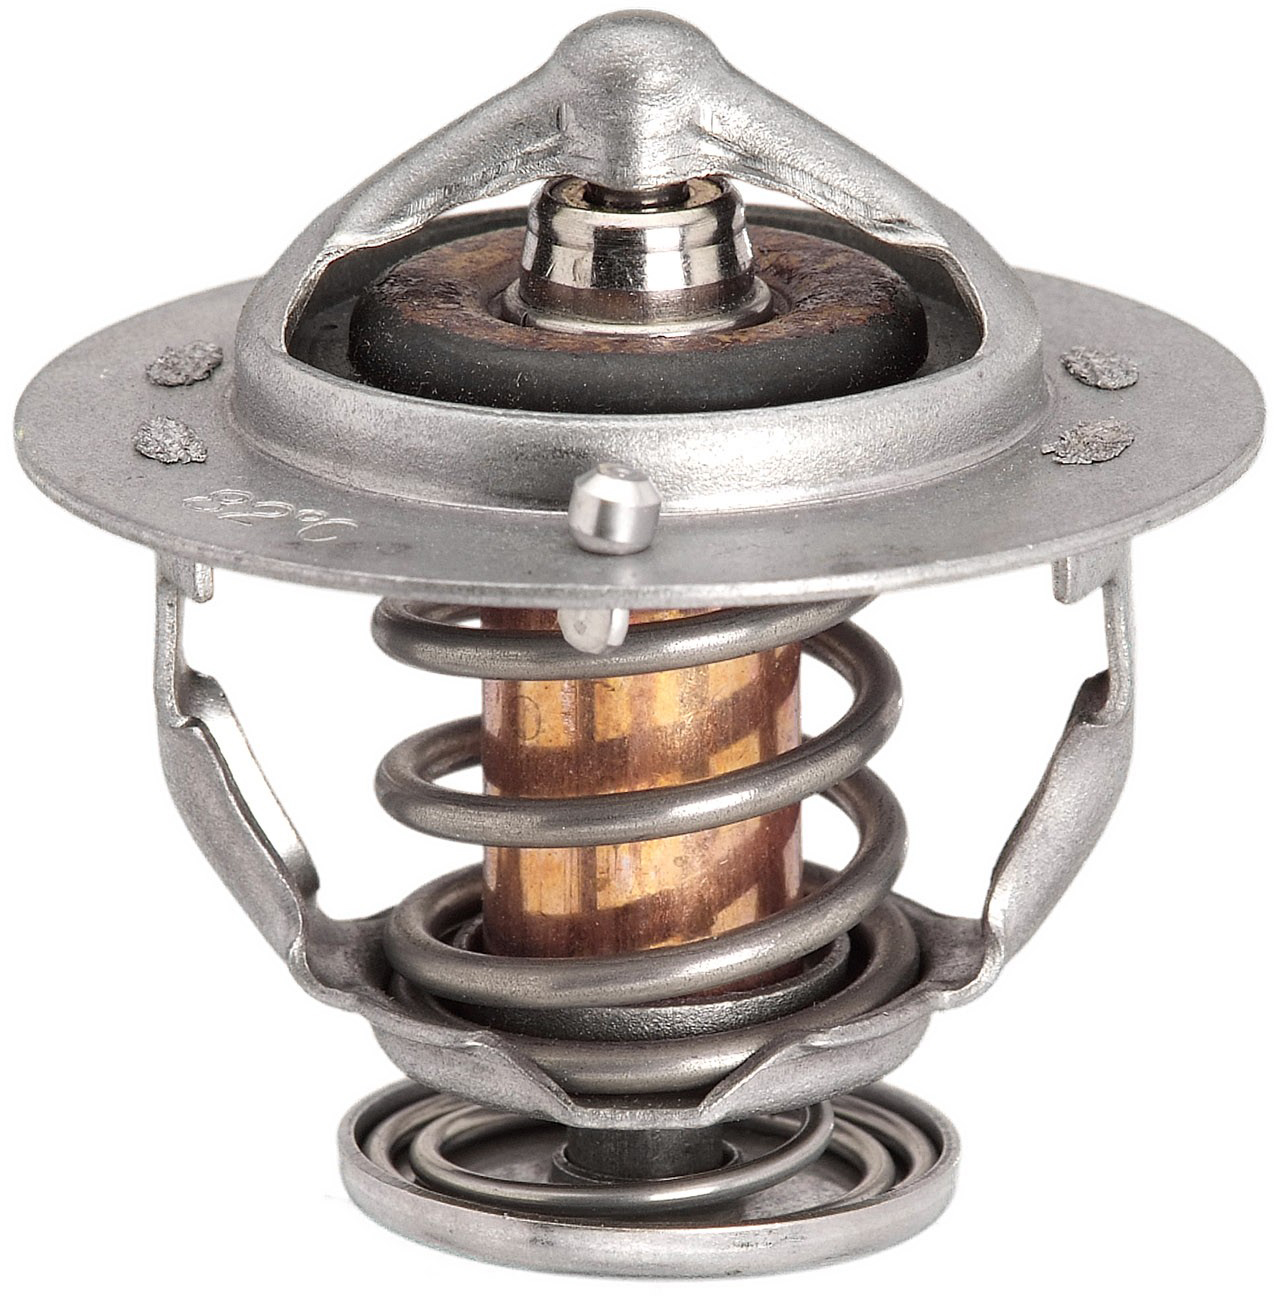 Stant 48118 OE Equivalent Thermostat 180 Degrees Fahrenheit Opening Temperature 